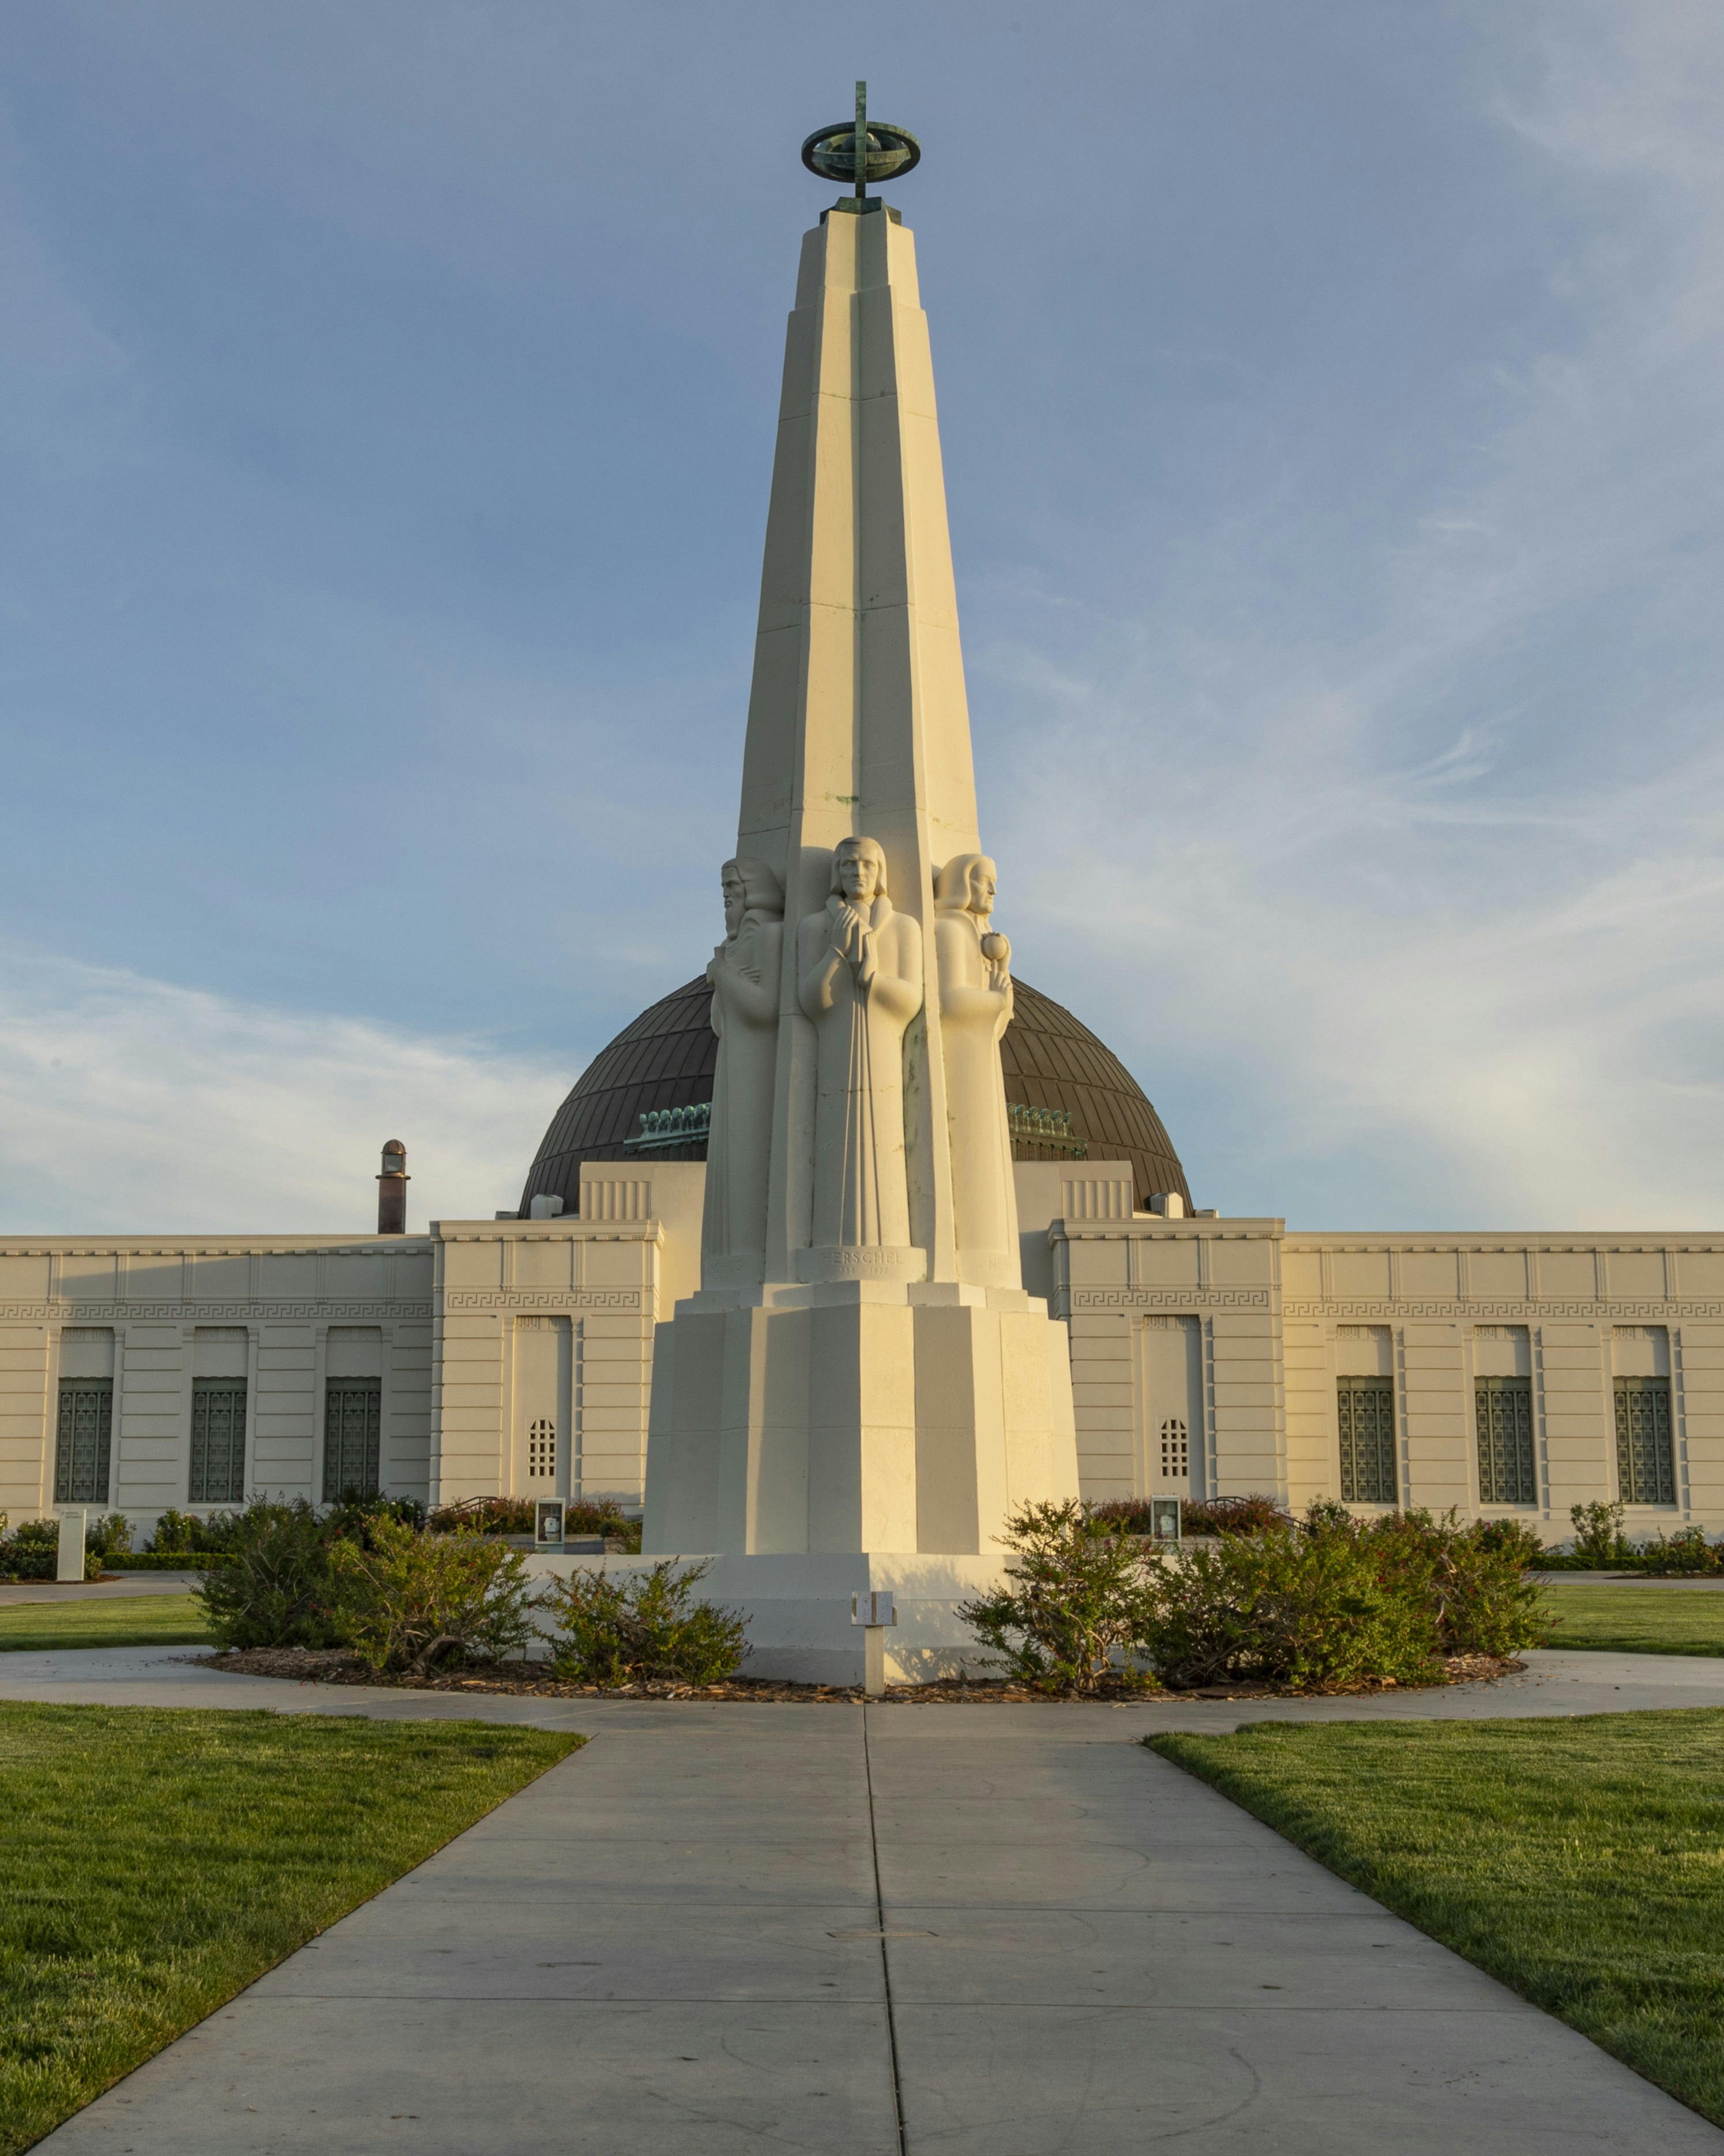 Exterior view of the Griffith Observatory, with a large outdoor concrete sculpture of a group of six people on all sides of the monument.